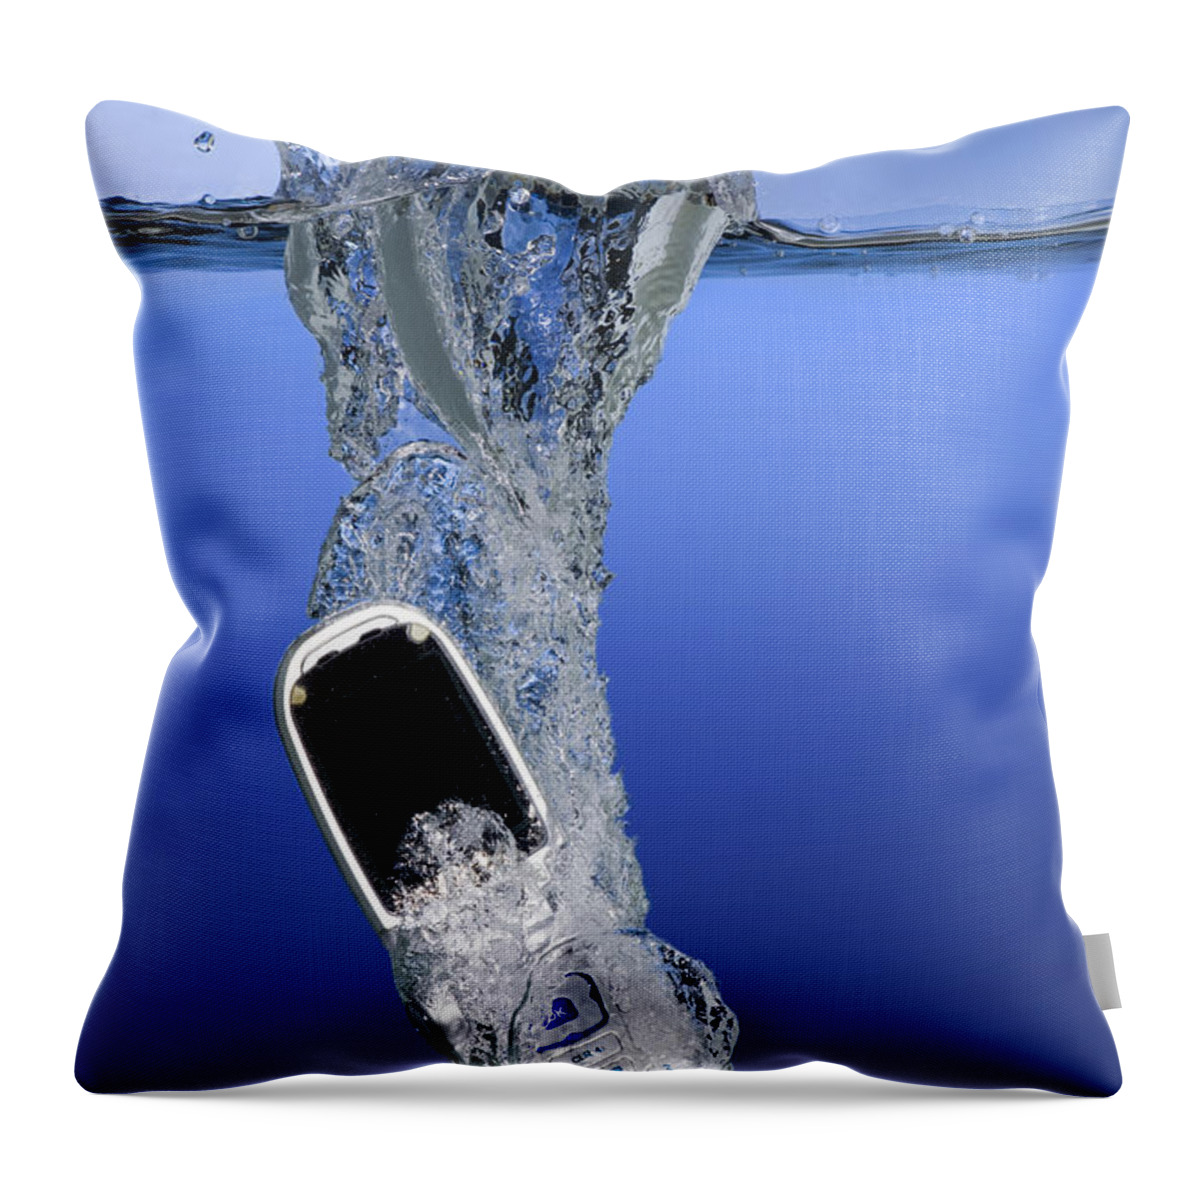 Cell Phone Throw Pillow featuring the photograph Cell Phone Dropped In Water #1 by Ted Kinsman